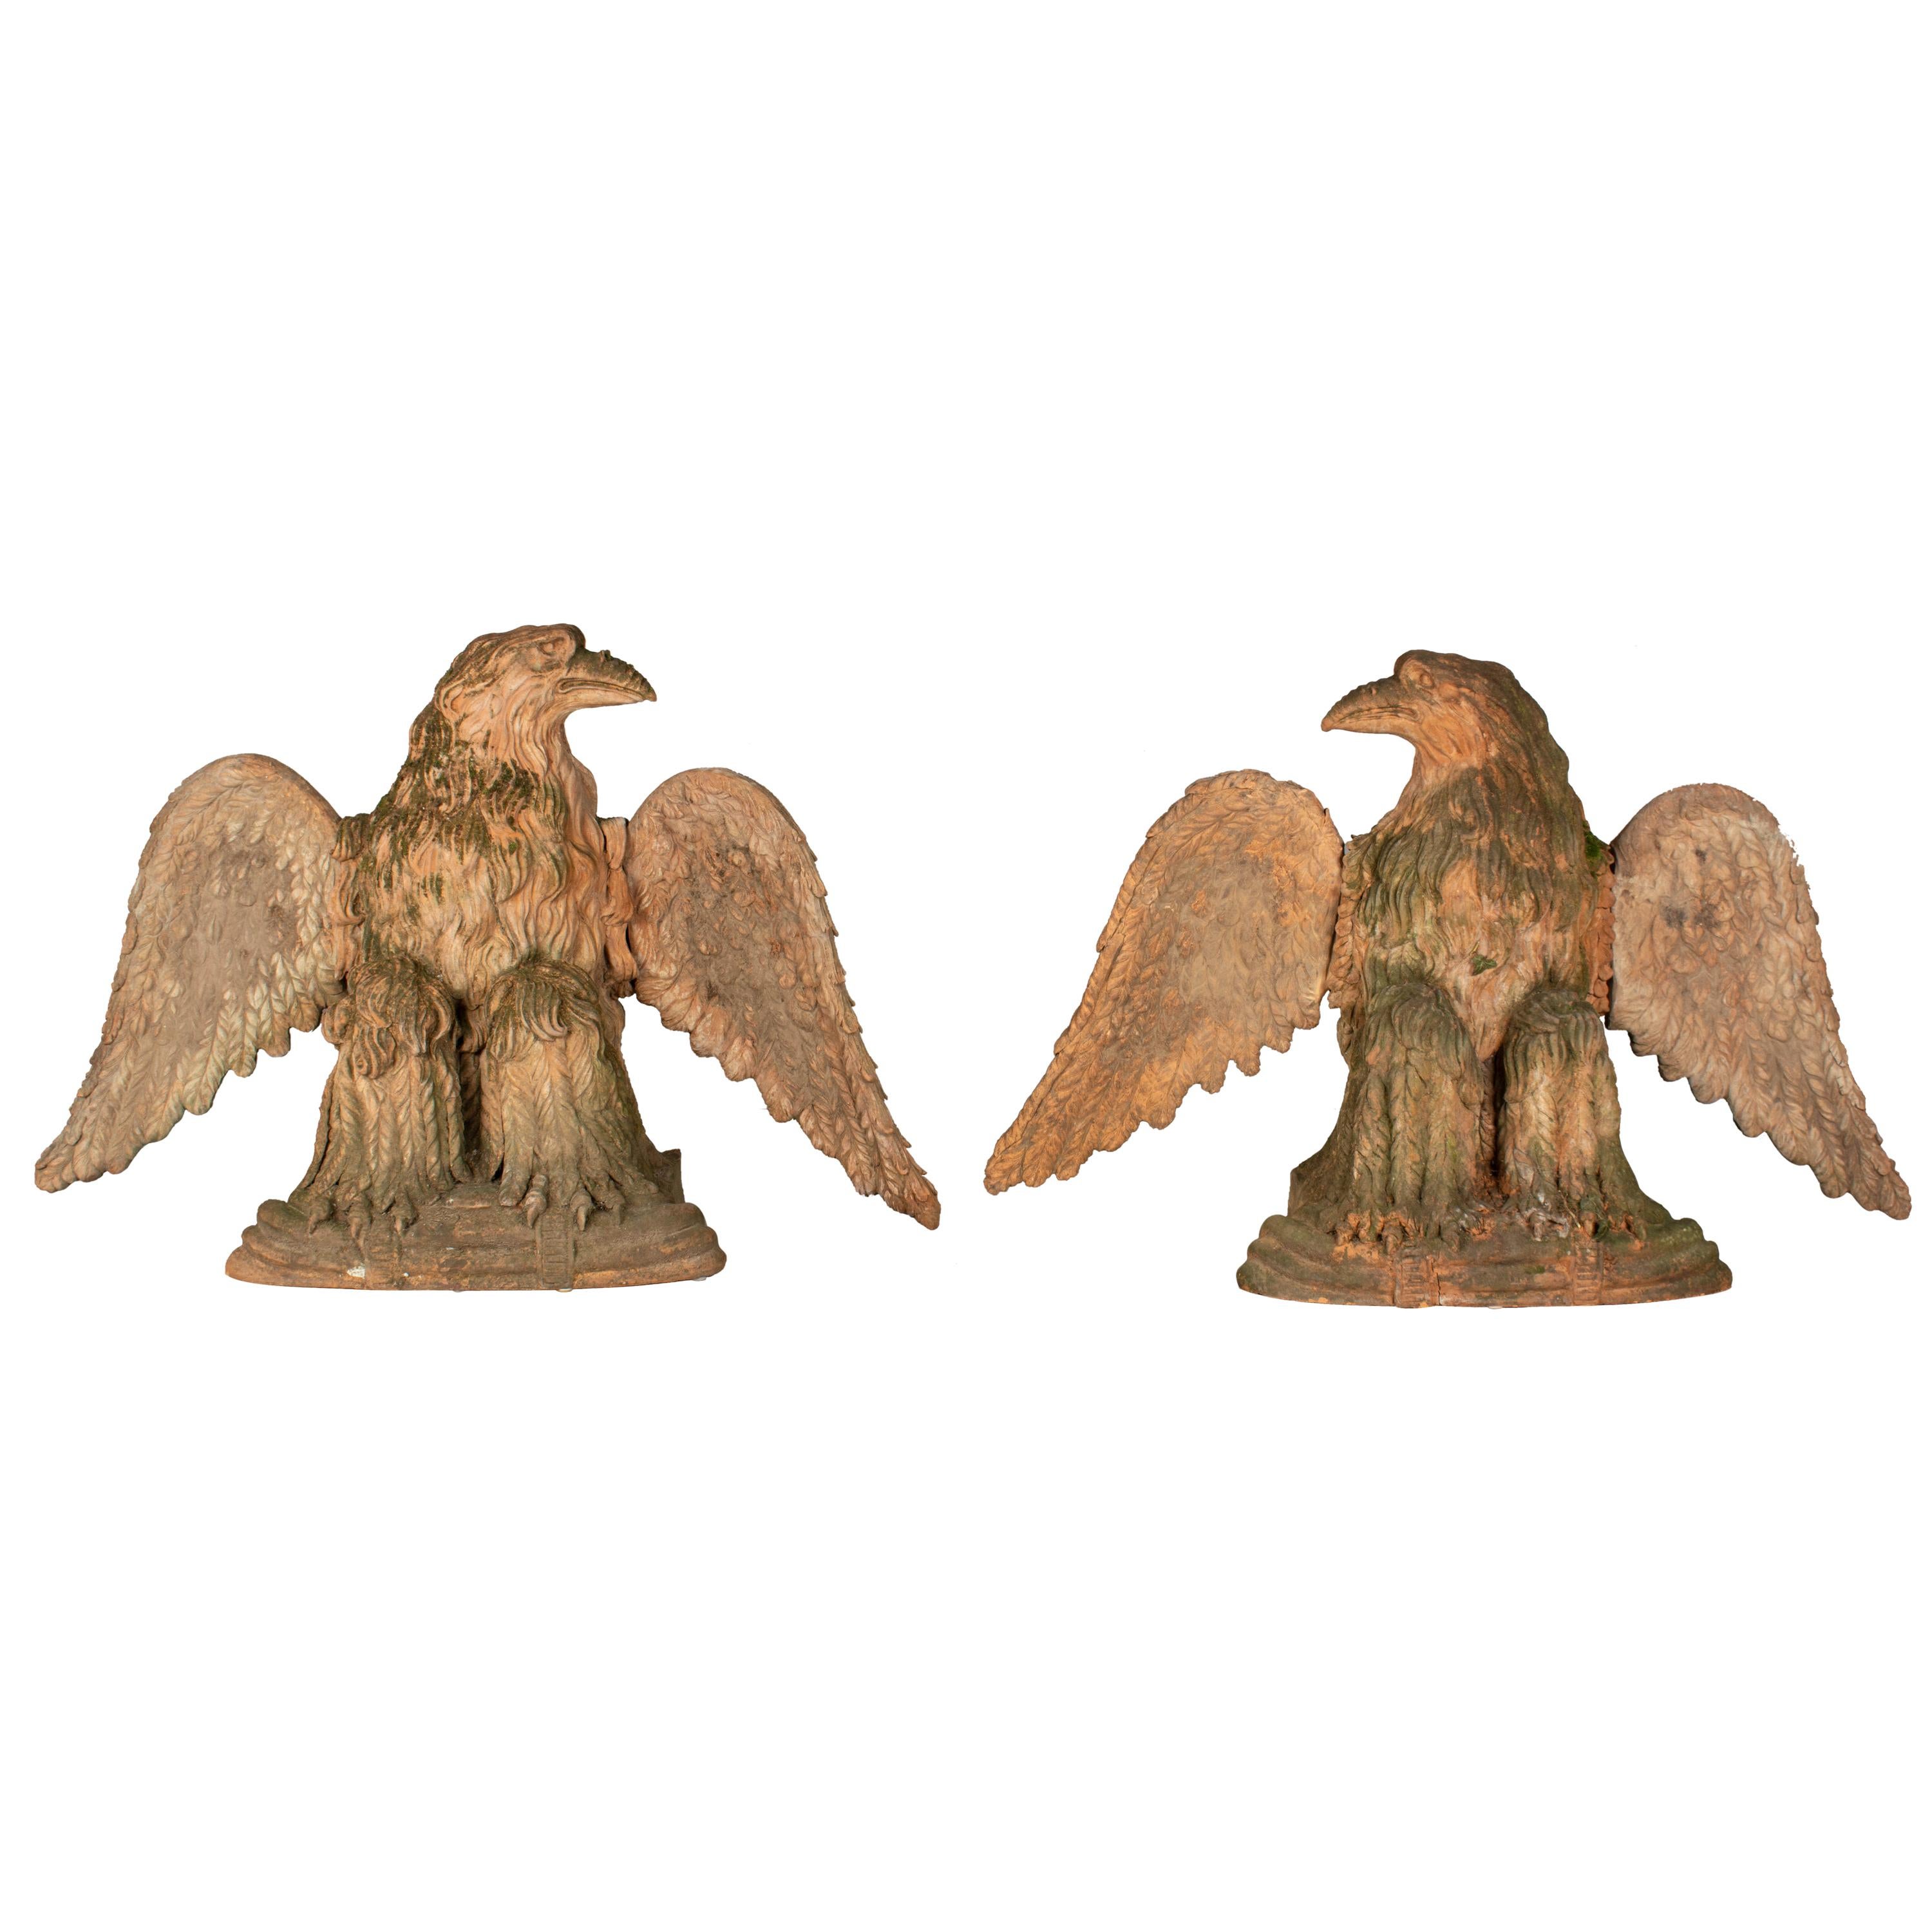 Pair of French Terracotta Garden Eagles Statues